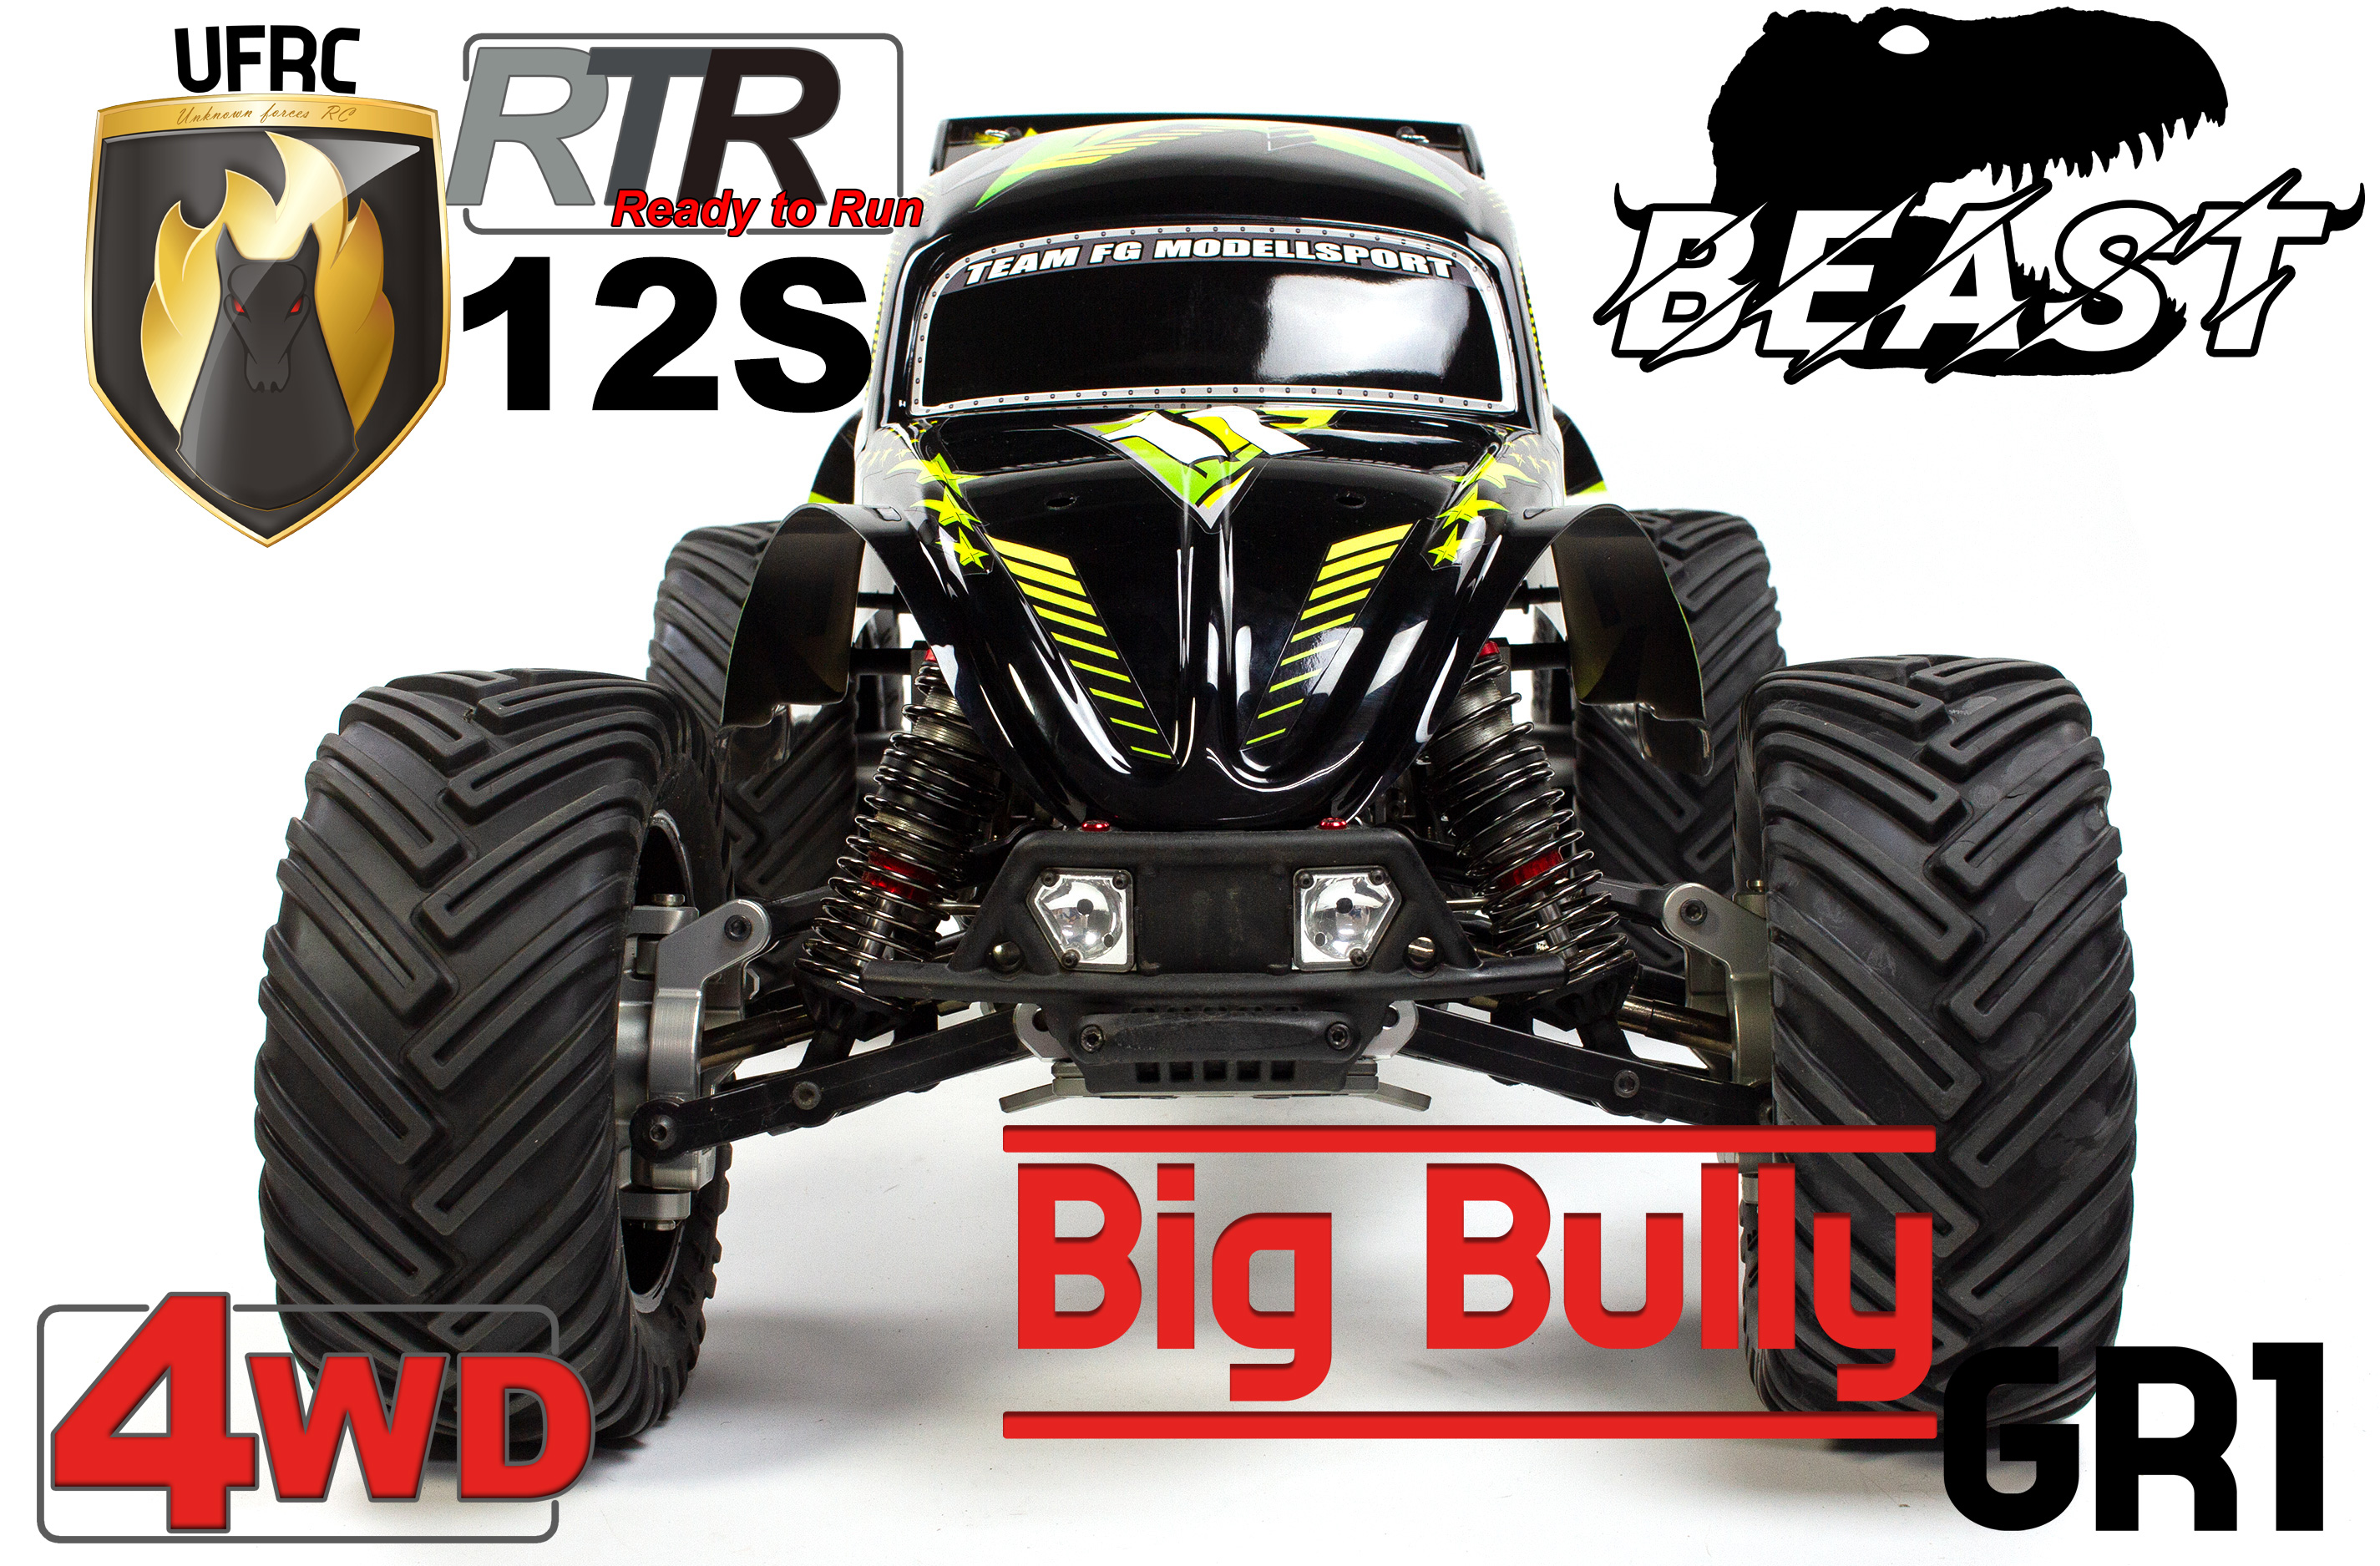 UFRC Big Bully GR1 4WD 1:5 Brushless Buggy 12S, RTR Version with painted Body Shell